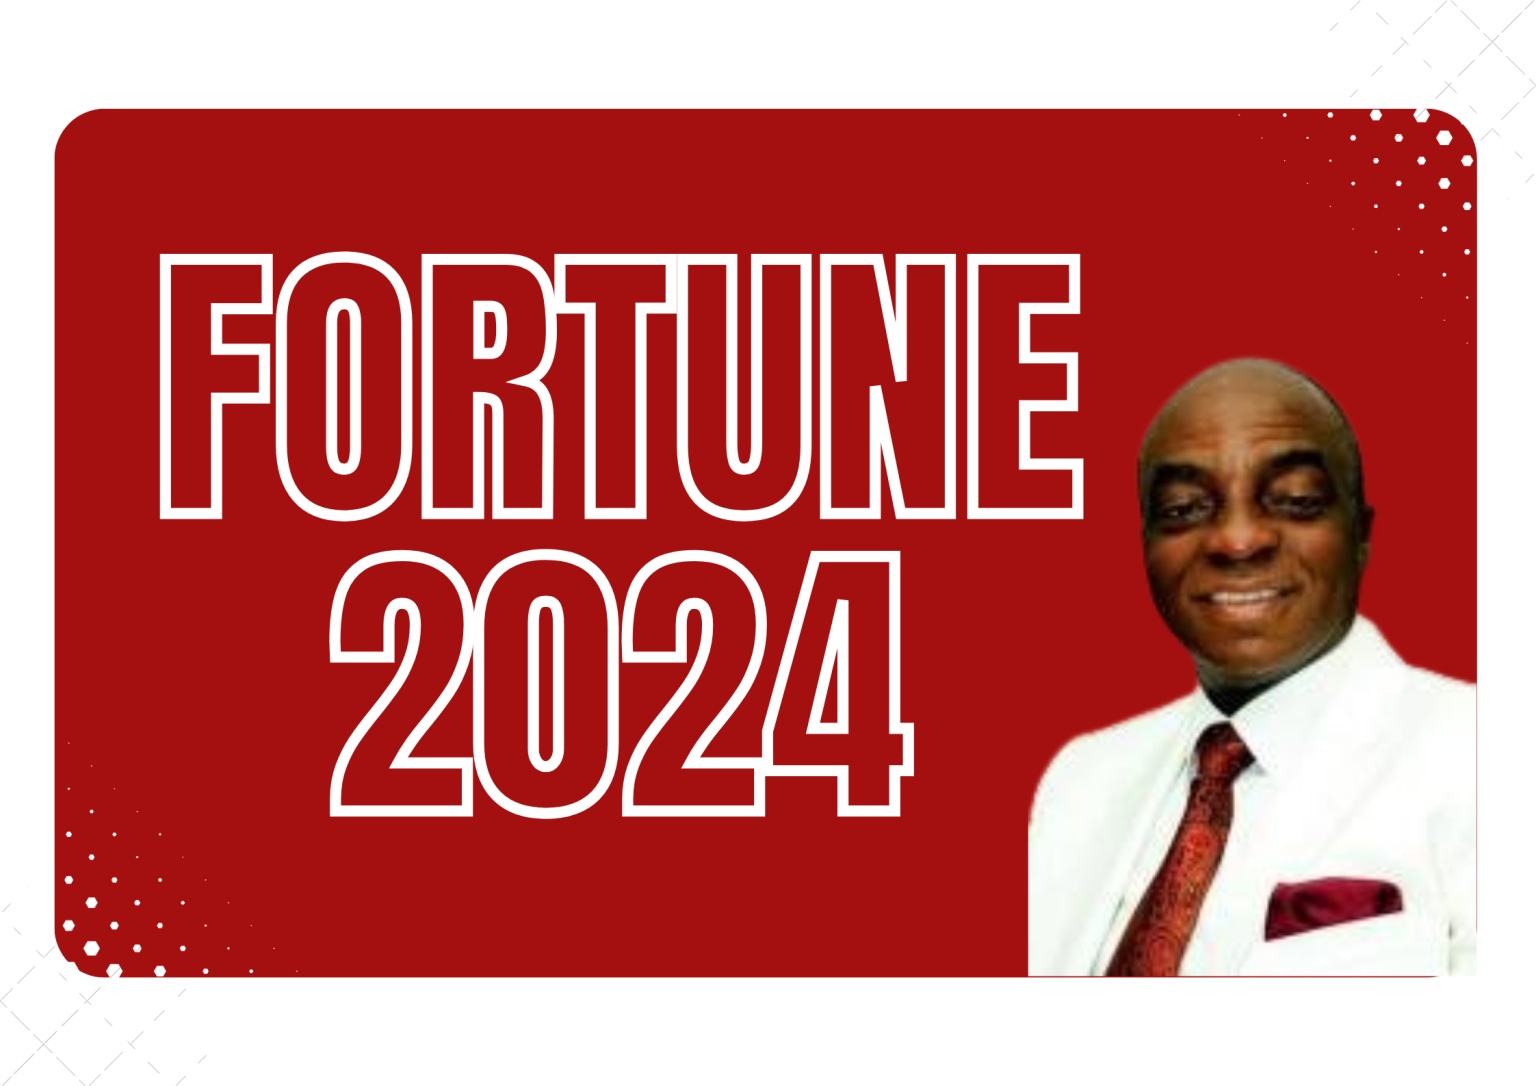 WINNERS CHAPEL 2024 THEME PROPHETIC FOCUS FOR THE YEAR 2024